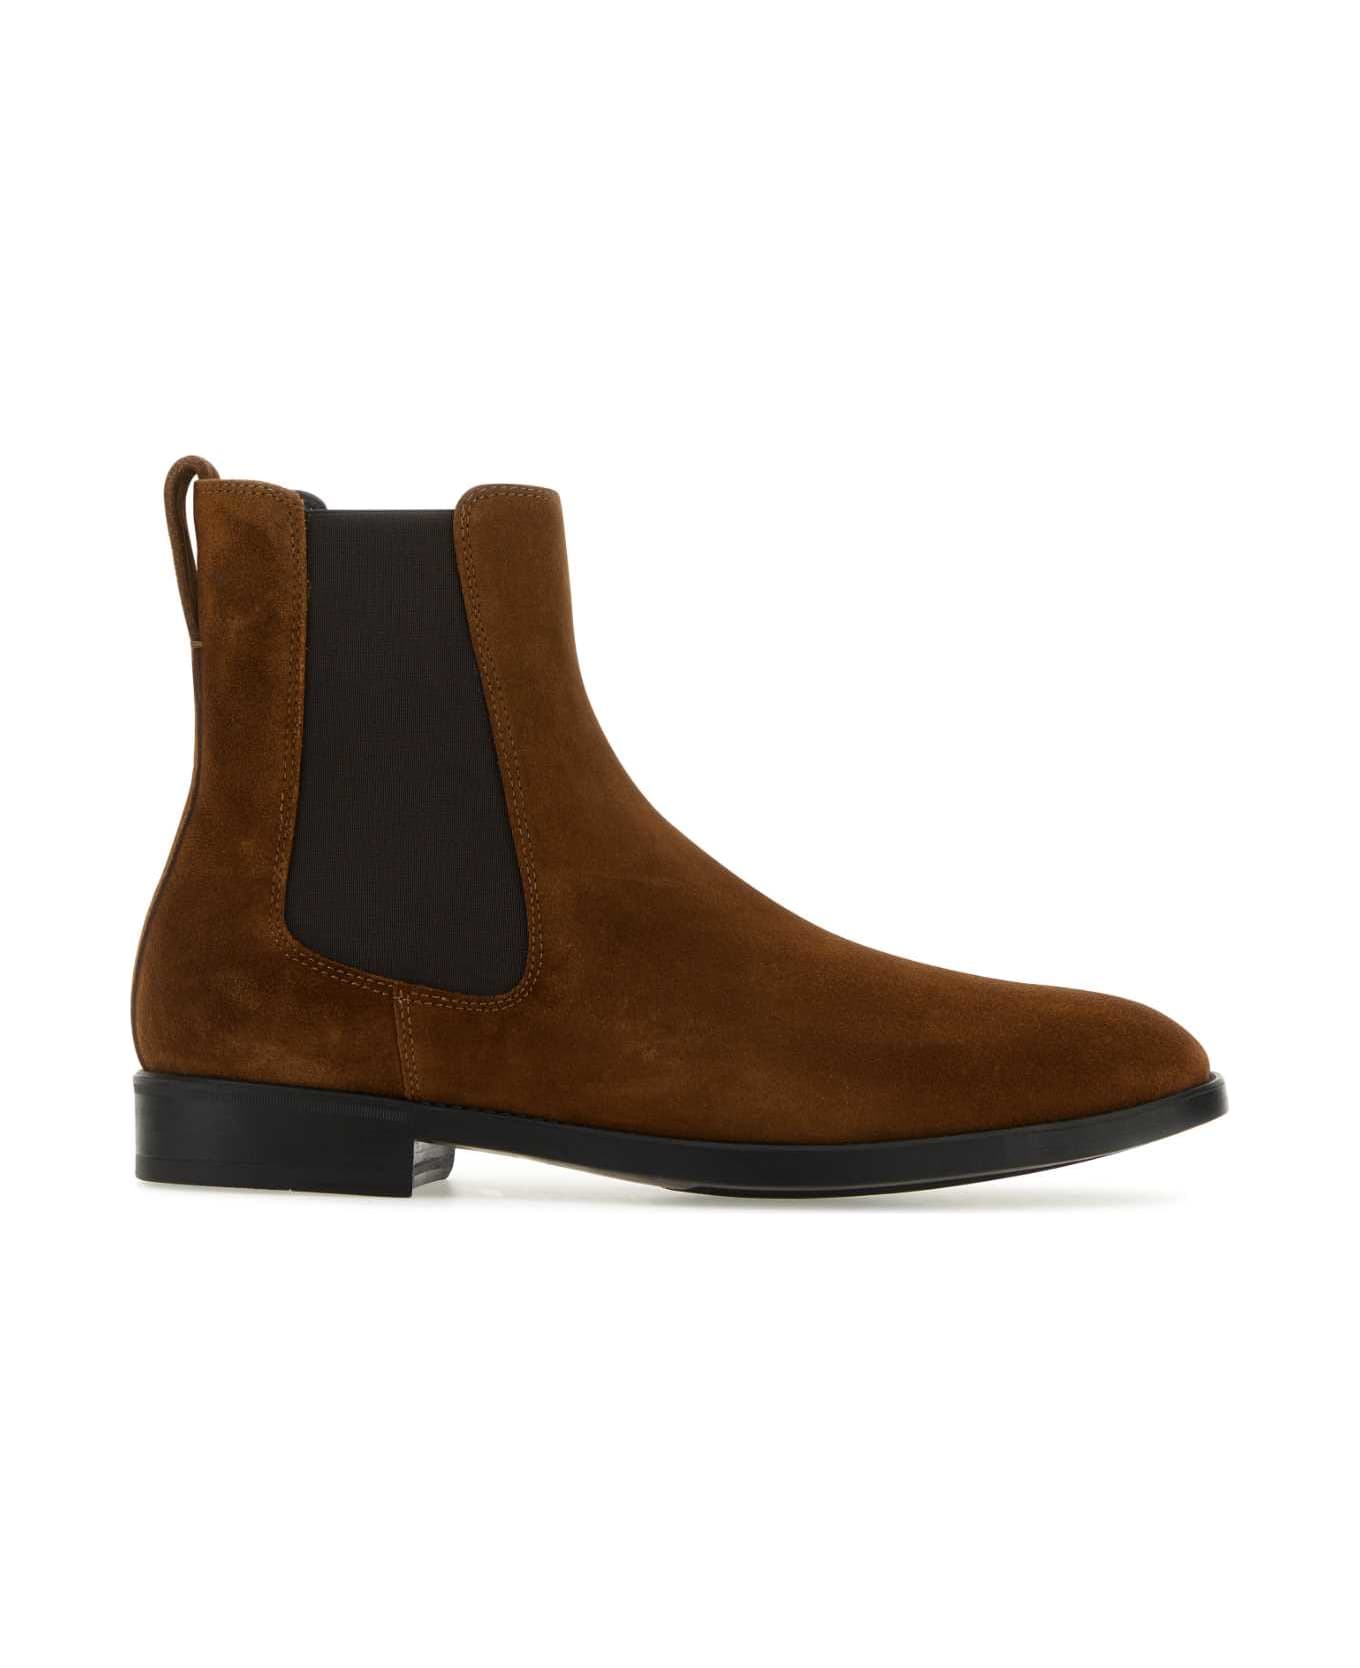 Tom Ford Caramel Suede Ankle Boots - TOBACCO ブーツ